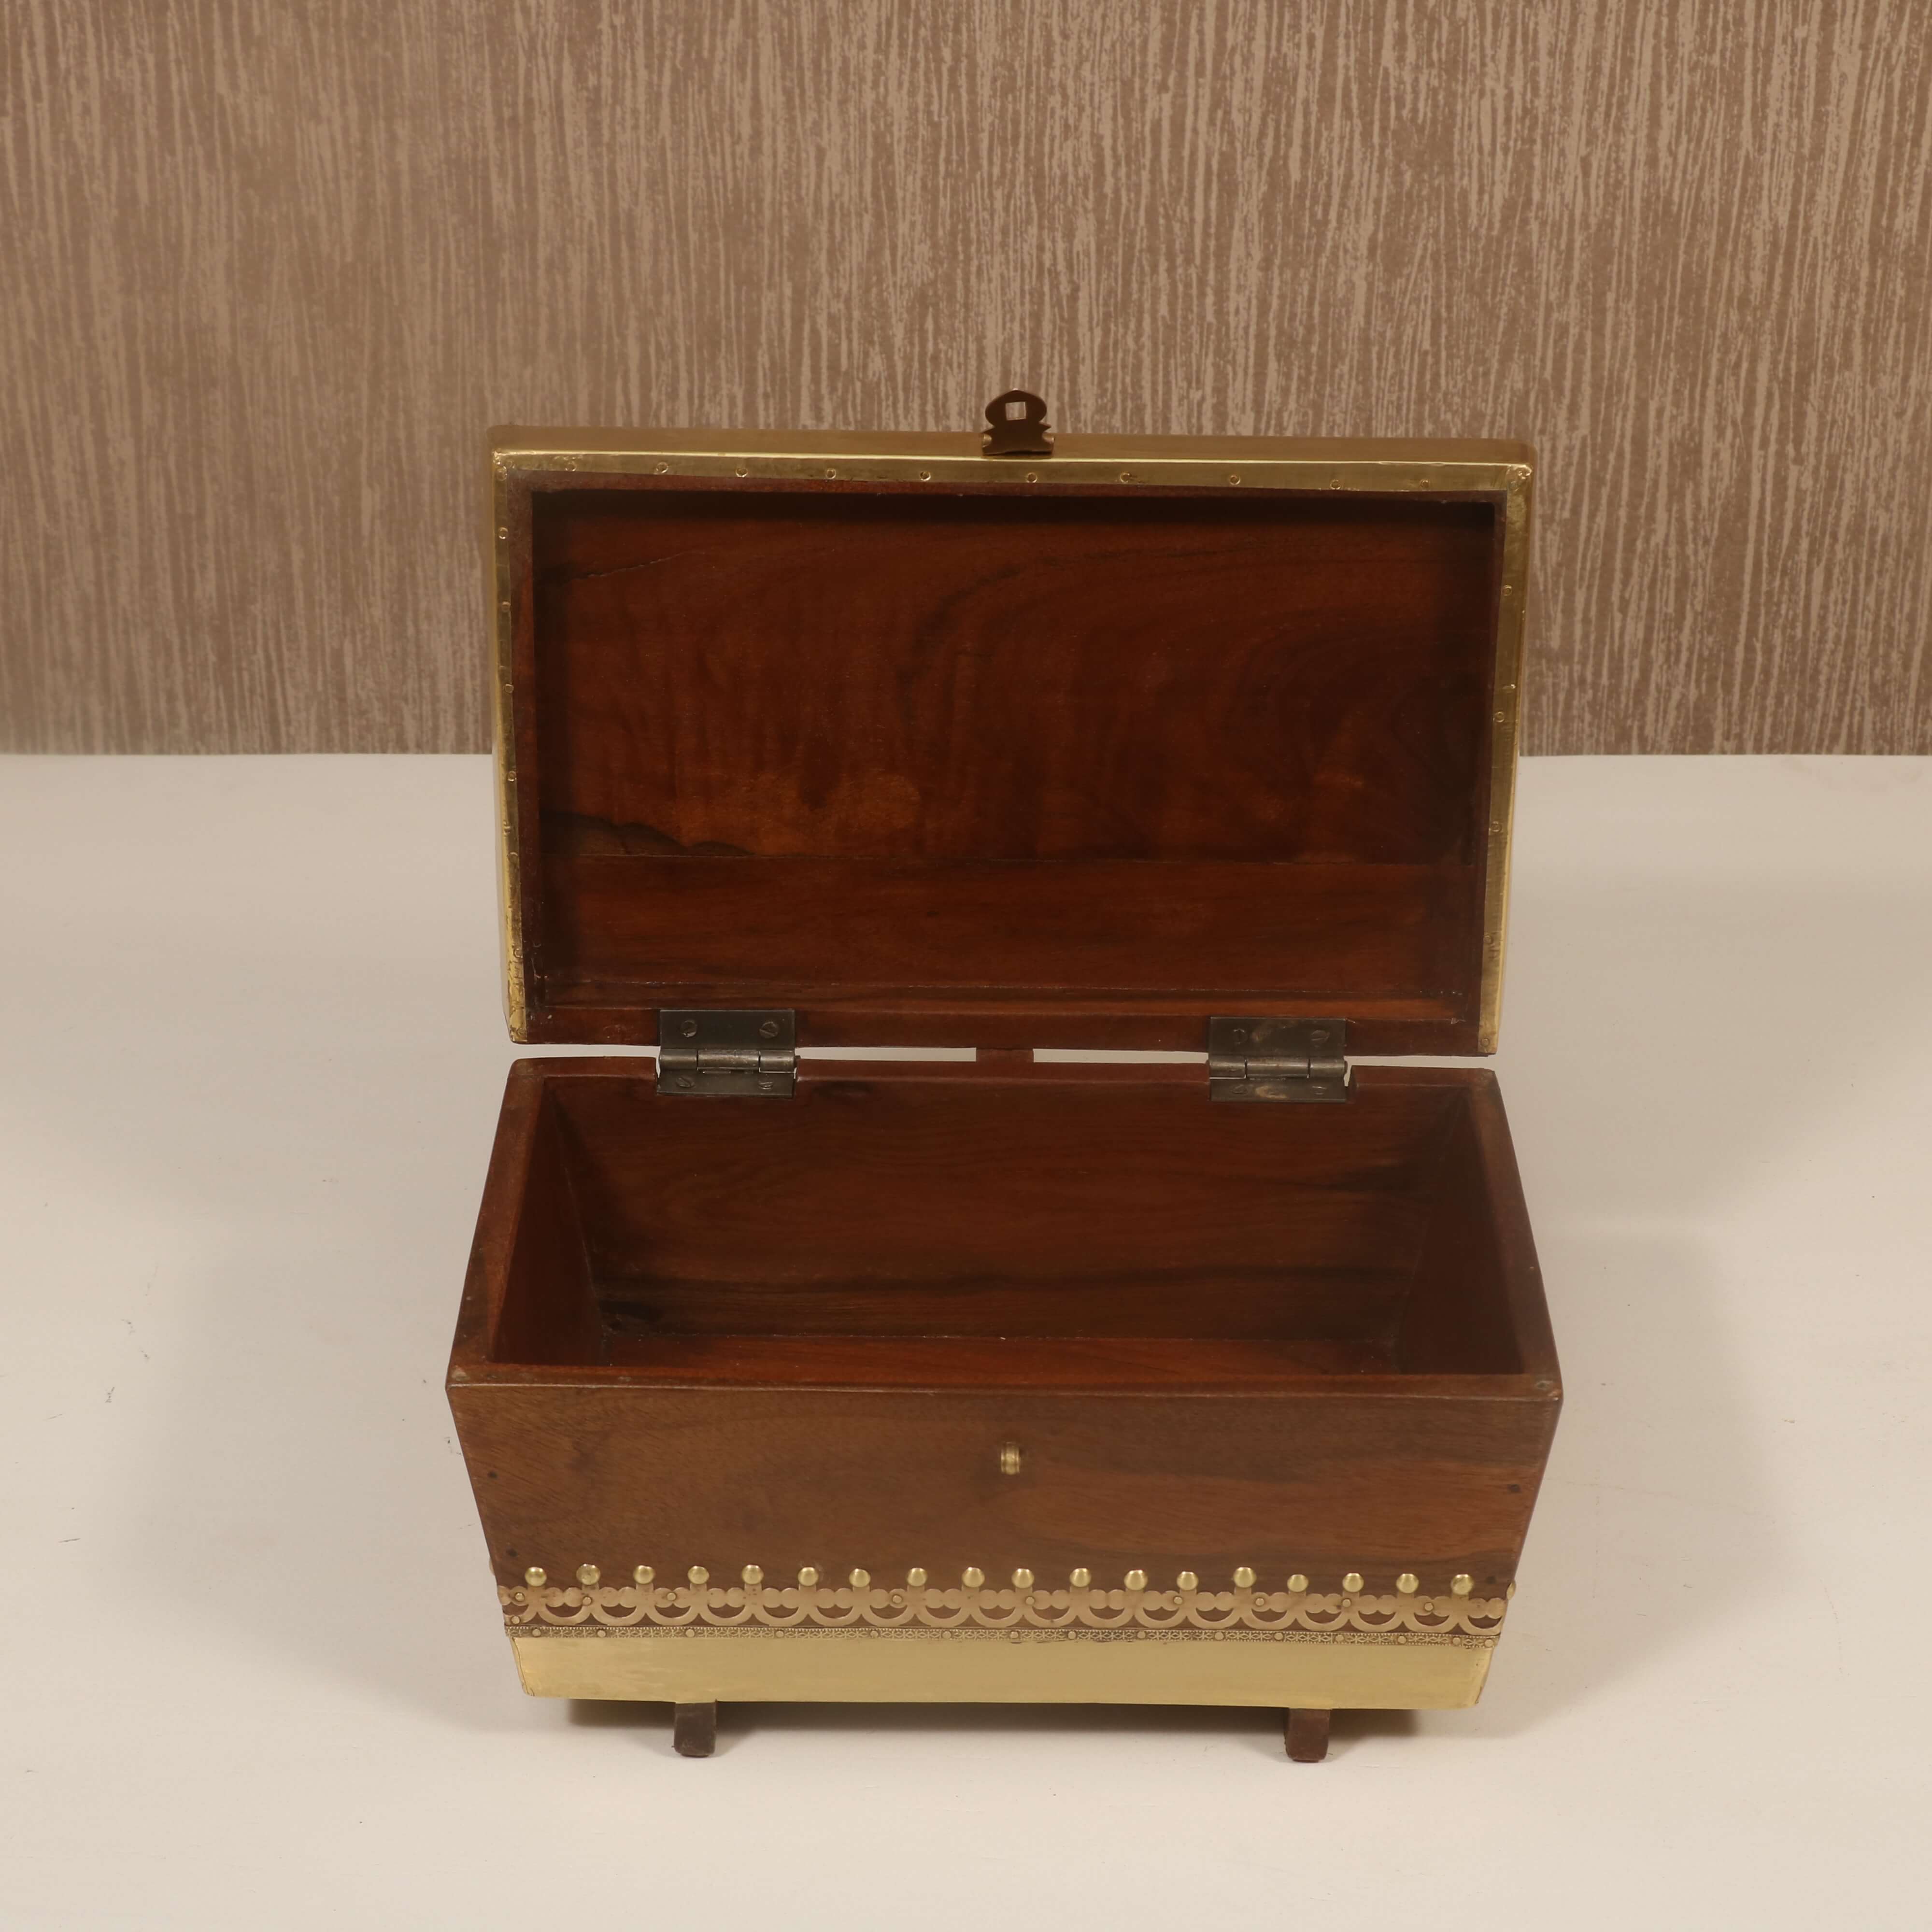 Brass Fitted Wooden Box Wooden Box